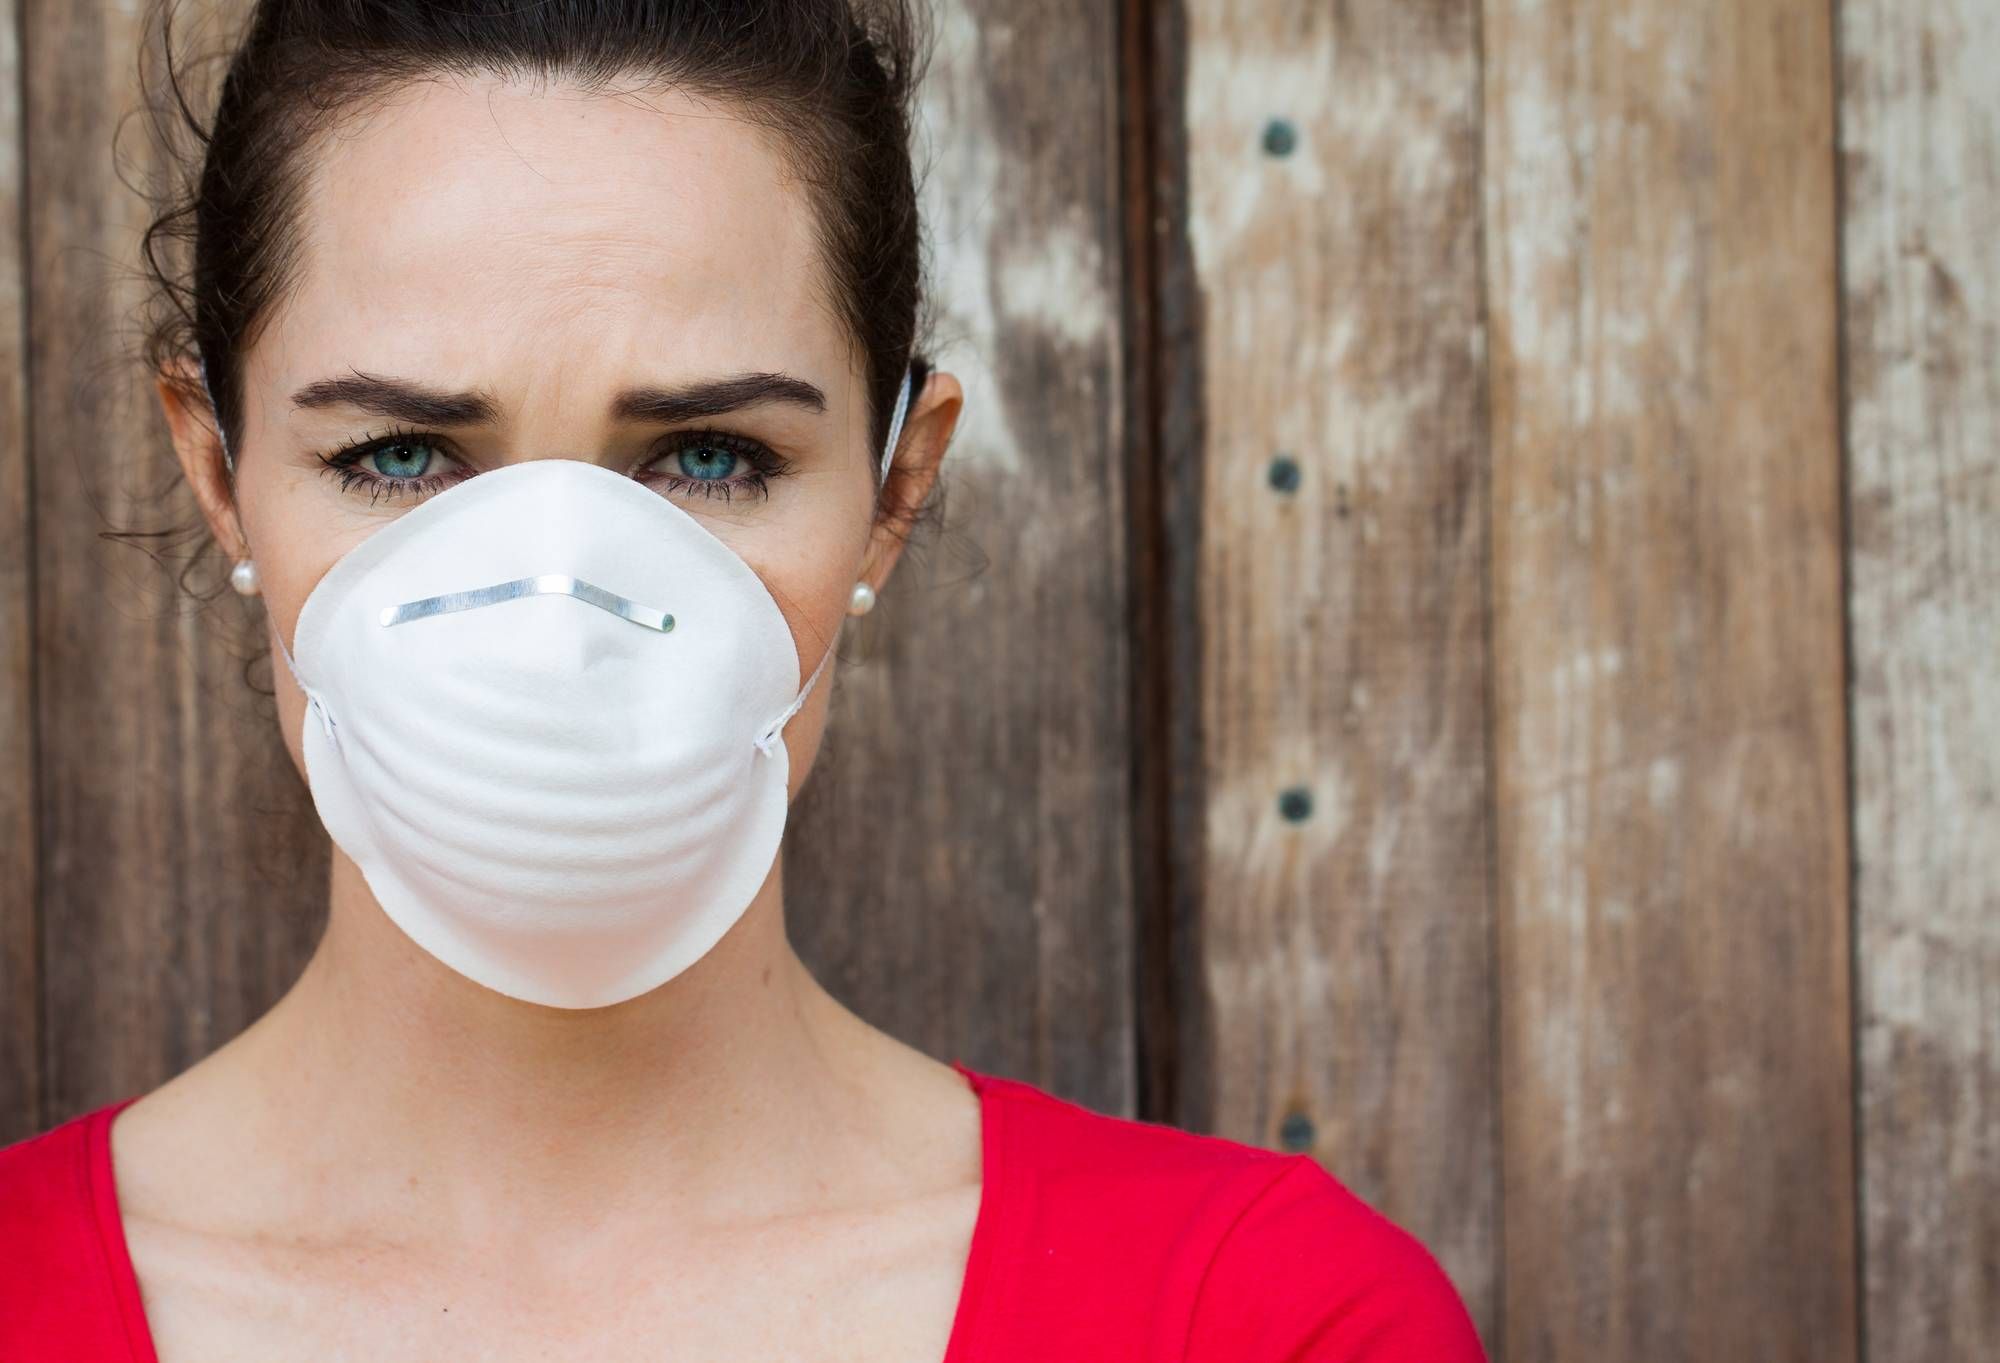 A COVID-19 lawsuit claims that a Dallas waitress was denied a face mask to protect herself.